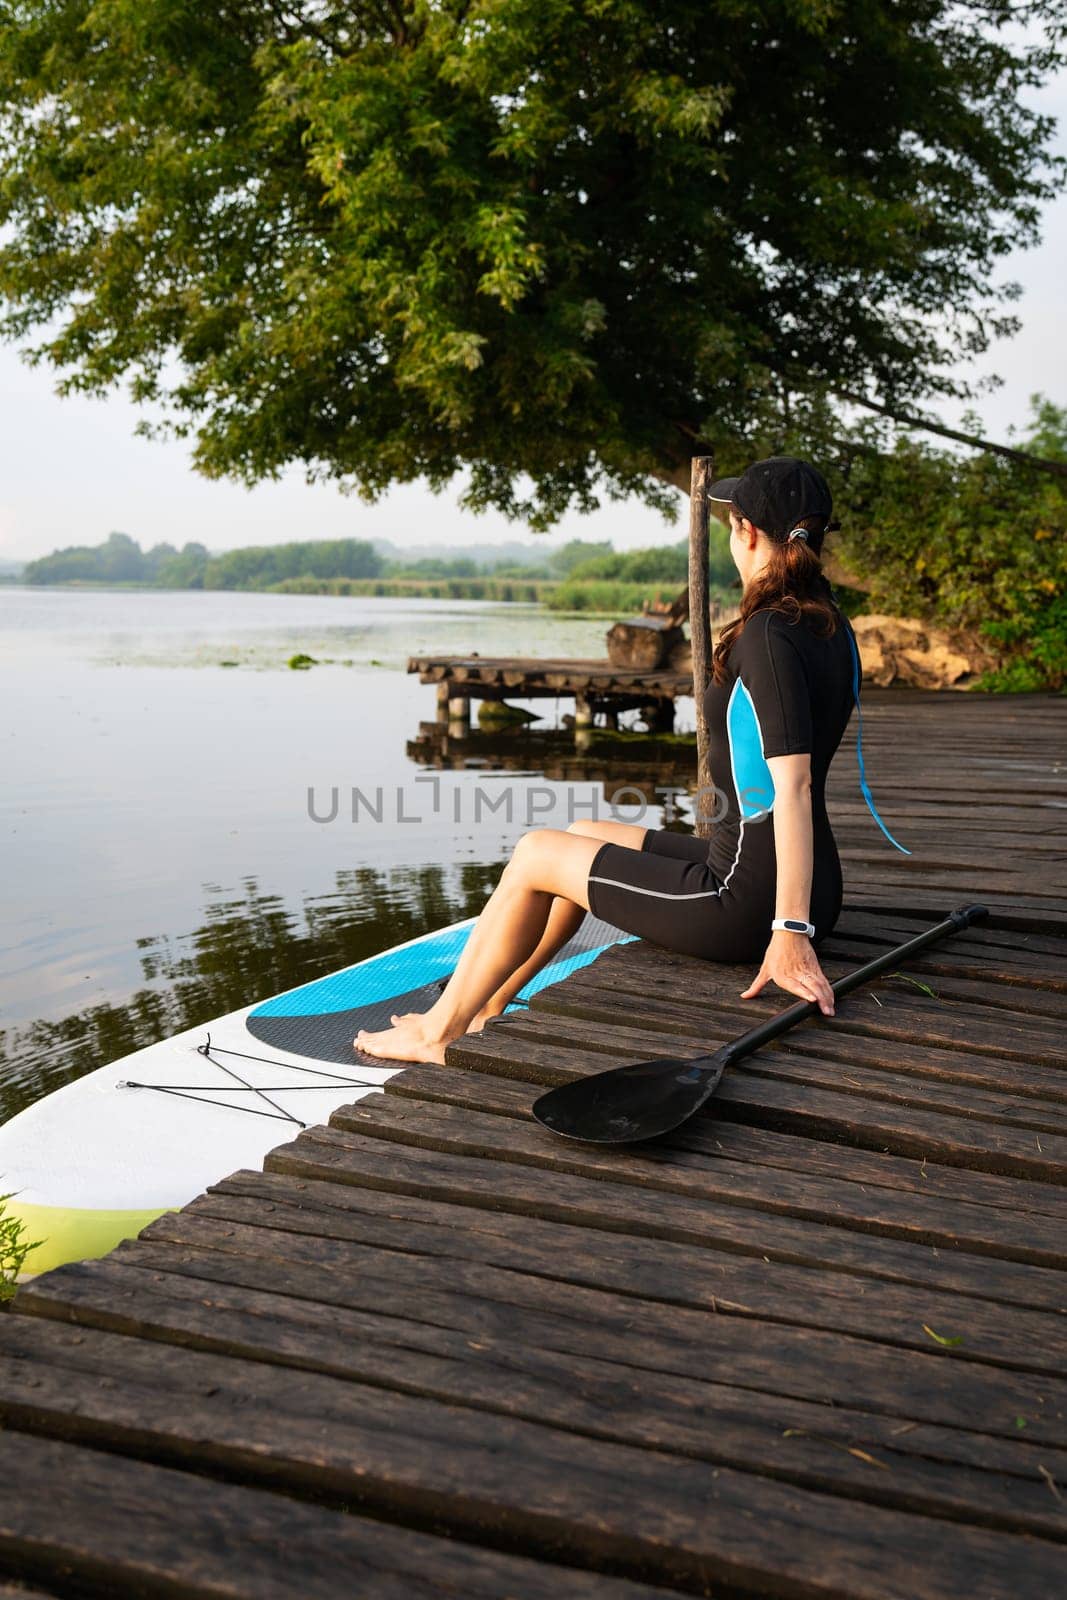 A girl in sportswear ready to paddleboard on a serene lake, surrounded by lush greenery. by sfinks